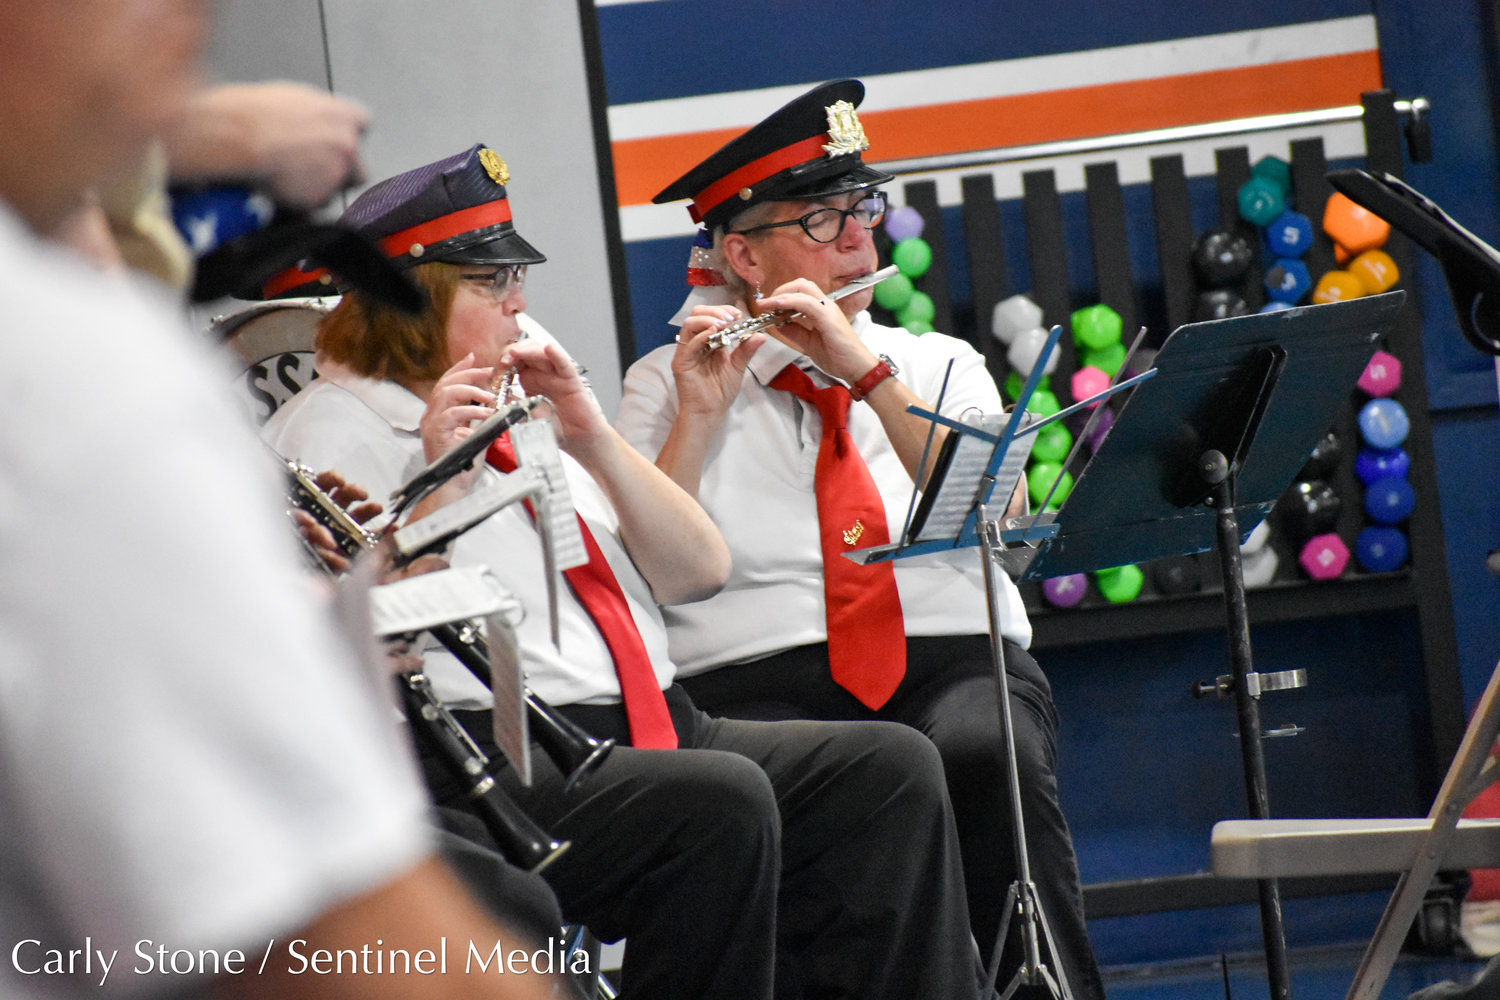 Live music filled the Parkway Center in Utica on Saturday, November 5, 2022, as guests waited for the veteran-recognition ceremony hosted by The Good News Center to begin.